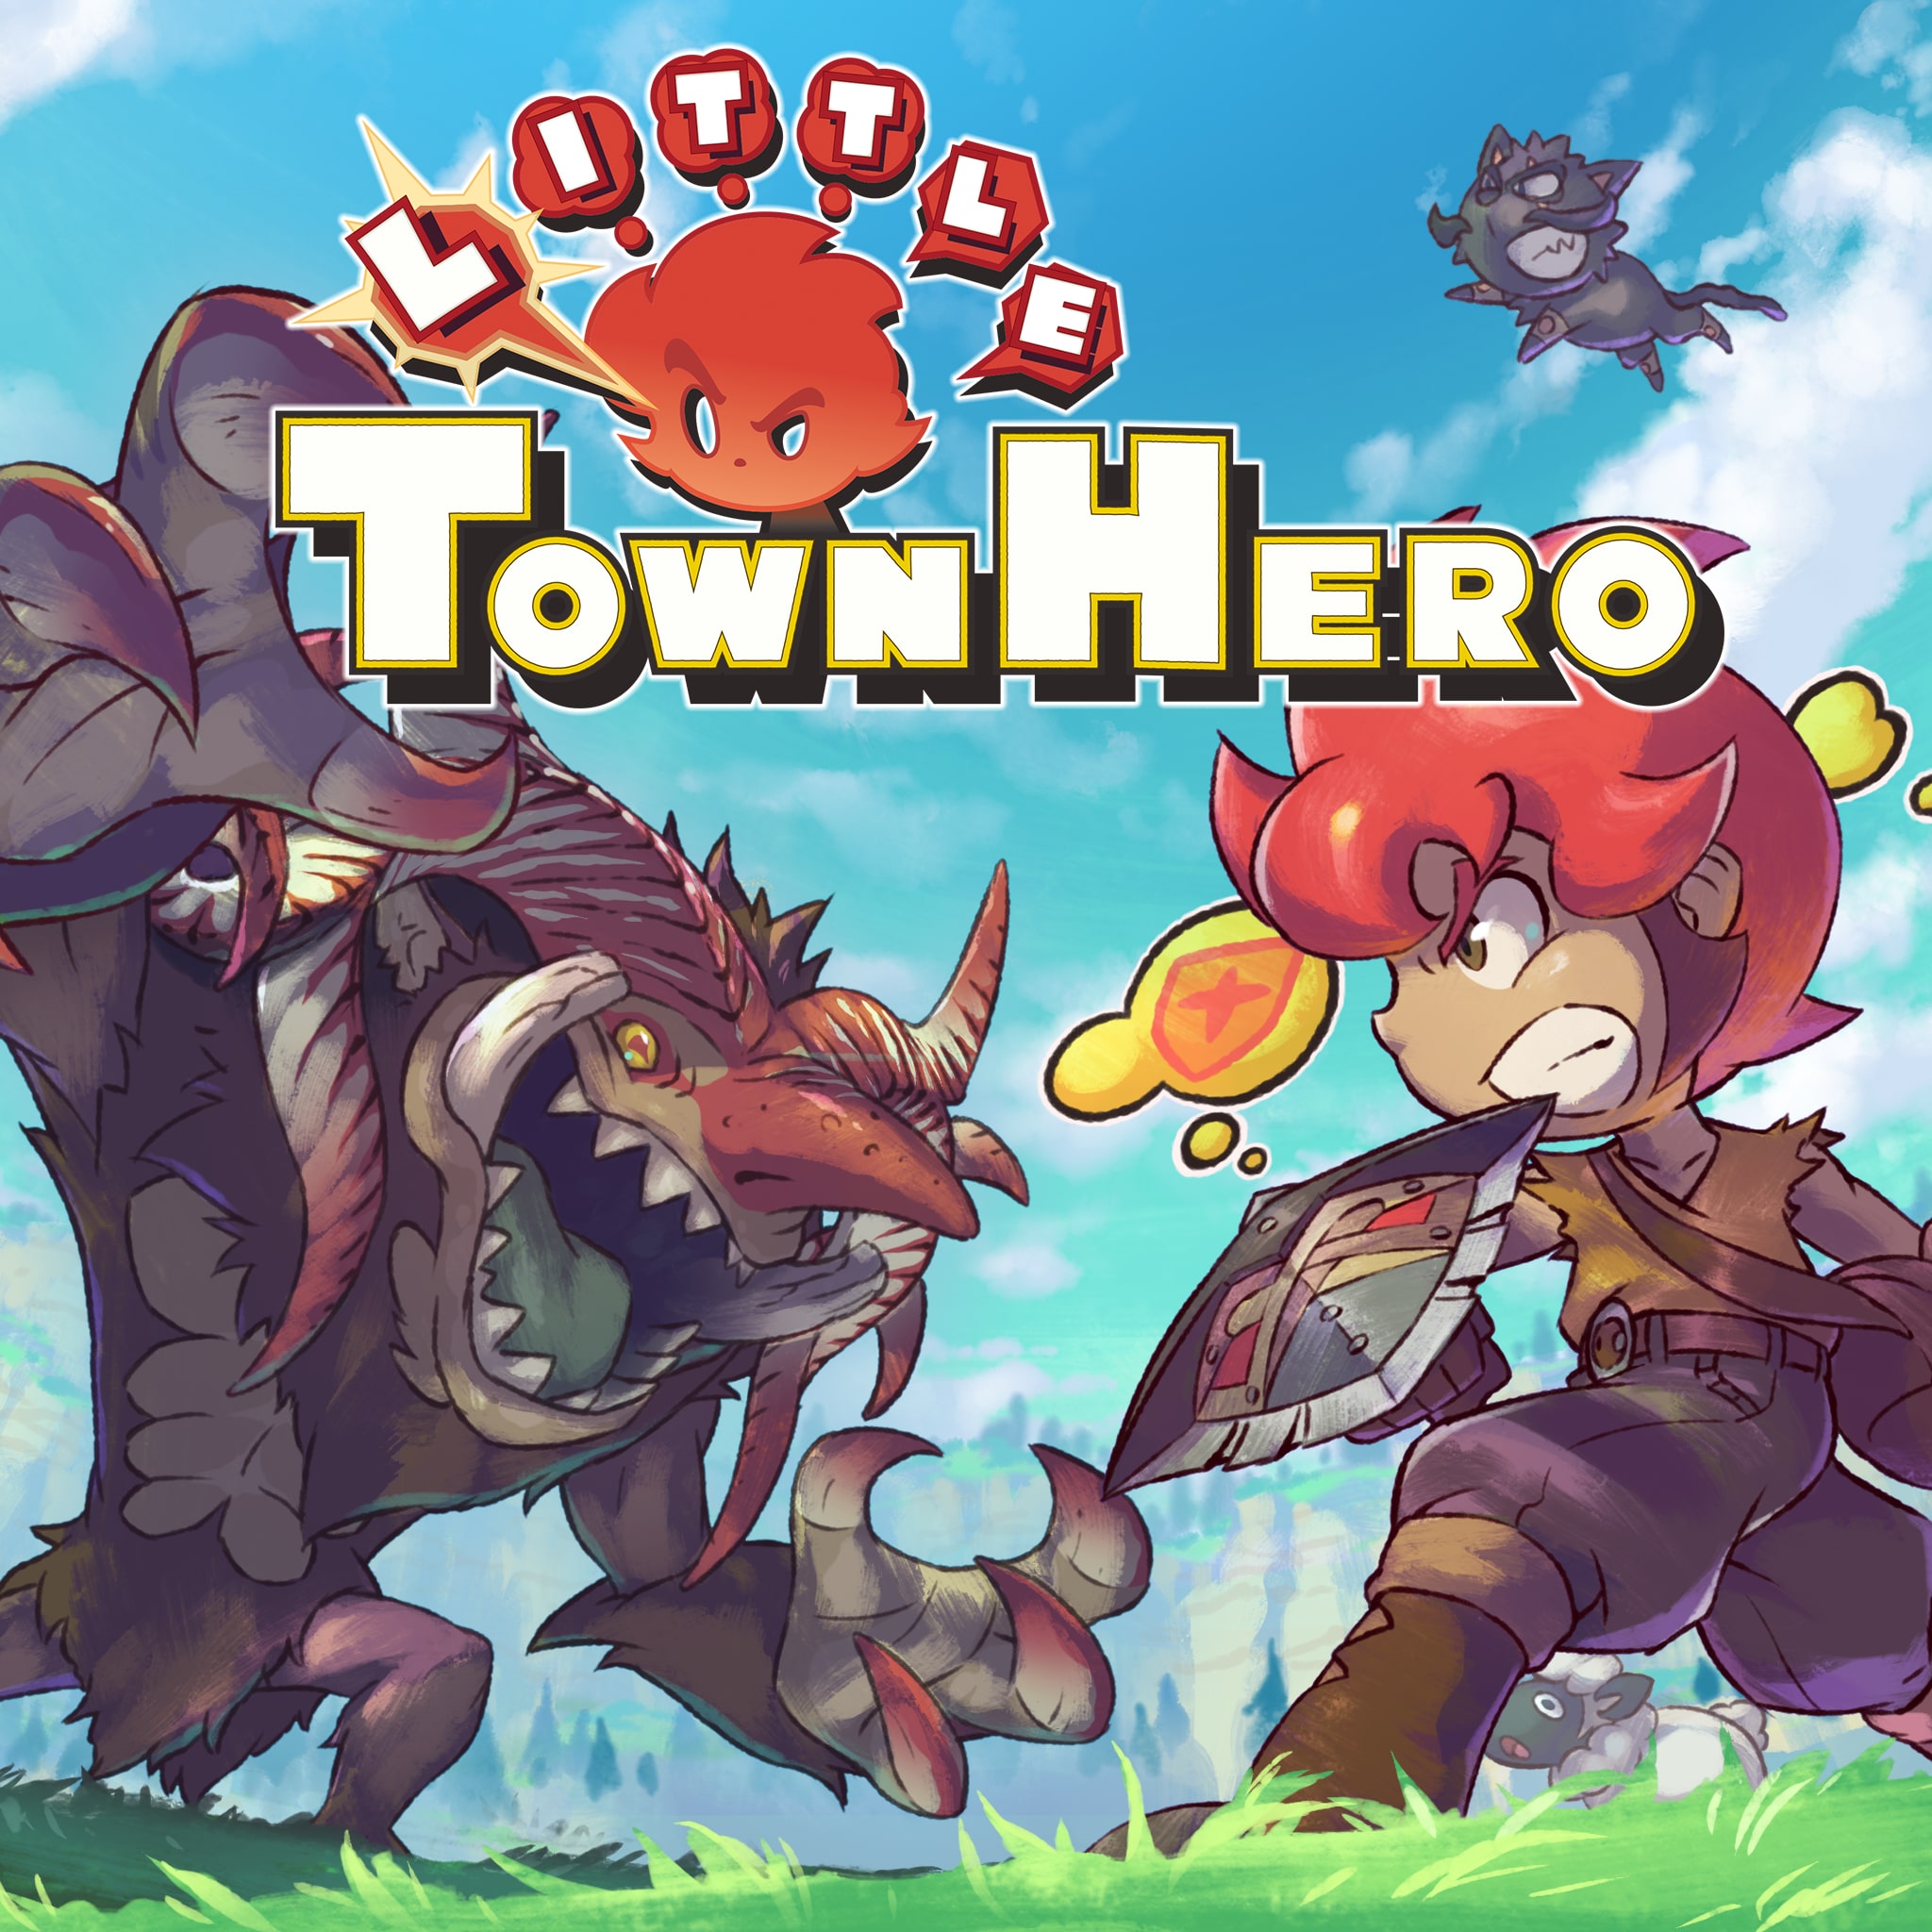 Game Freak to release Switch RPG Little Town Hero for PS4